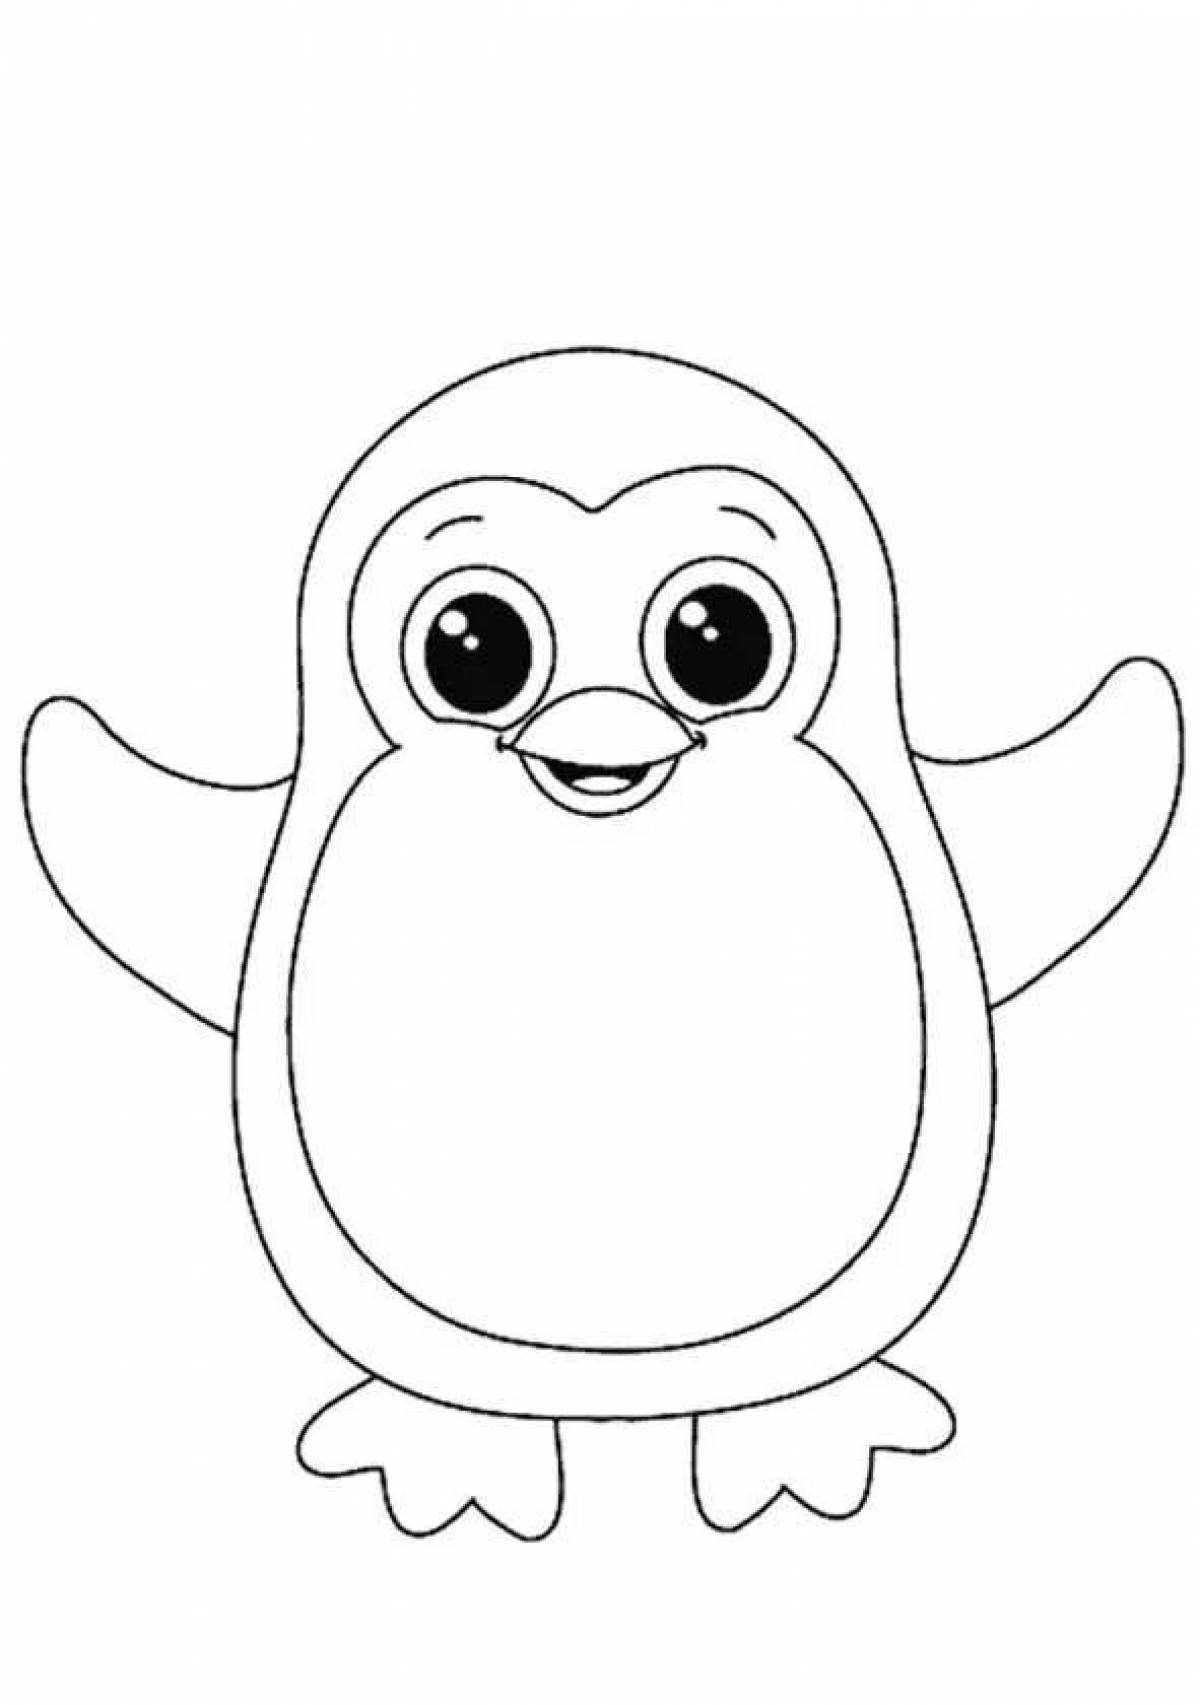 Cute penguin drawing for kids